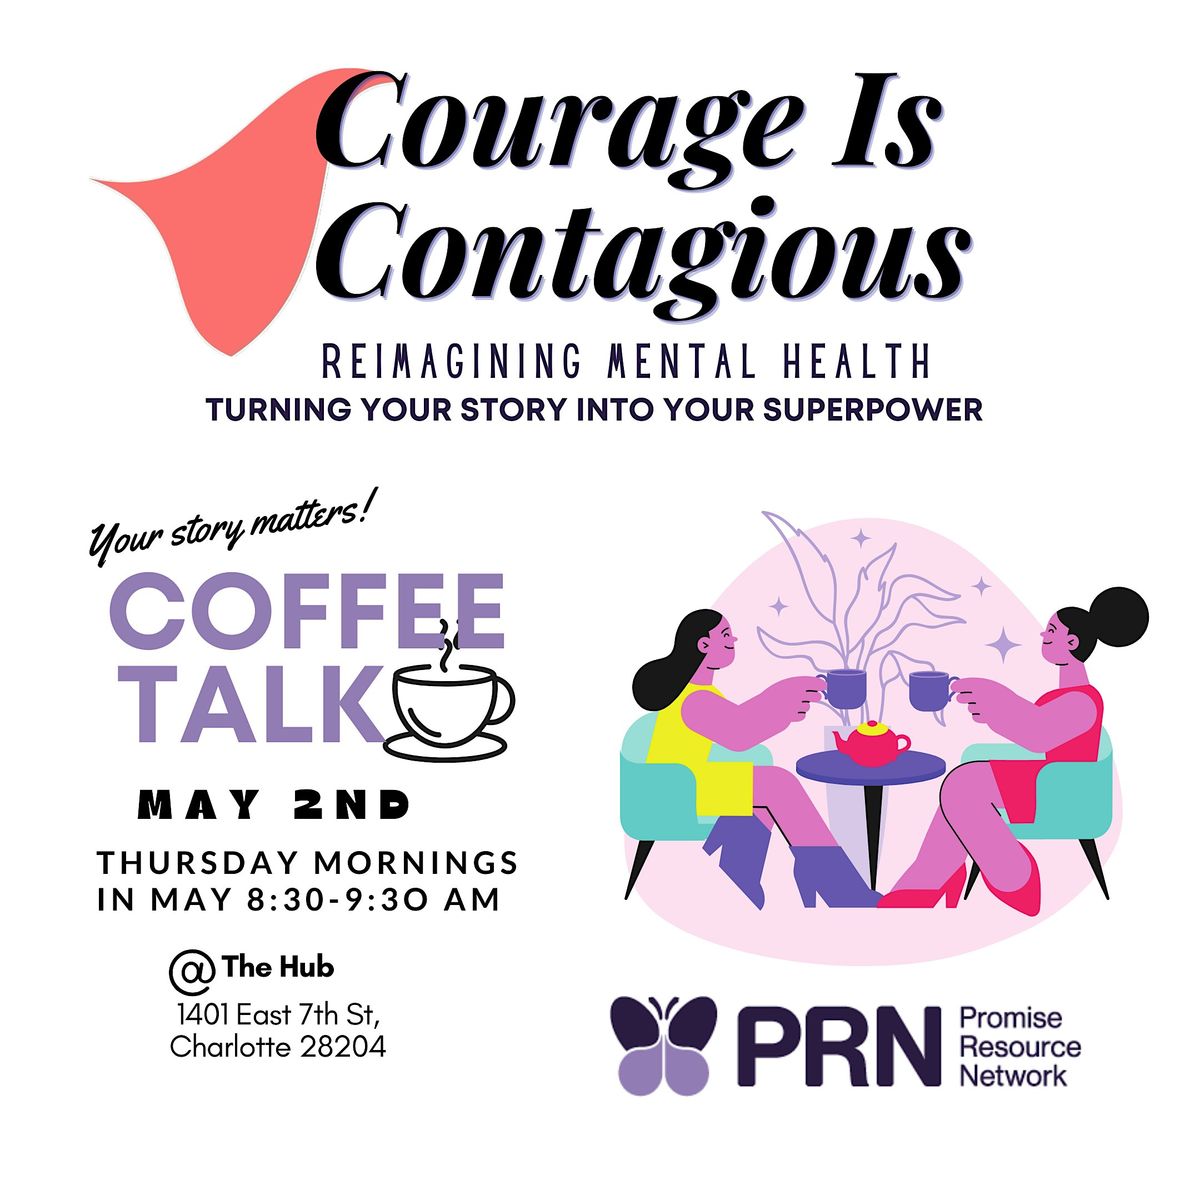 Coffee Talk: Courage is Contagious-Turning your story into your superpower!